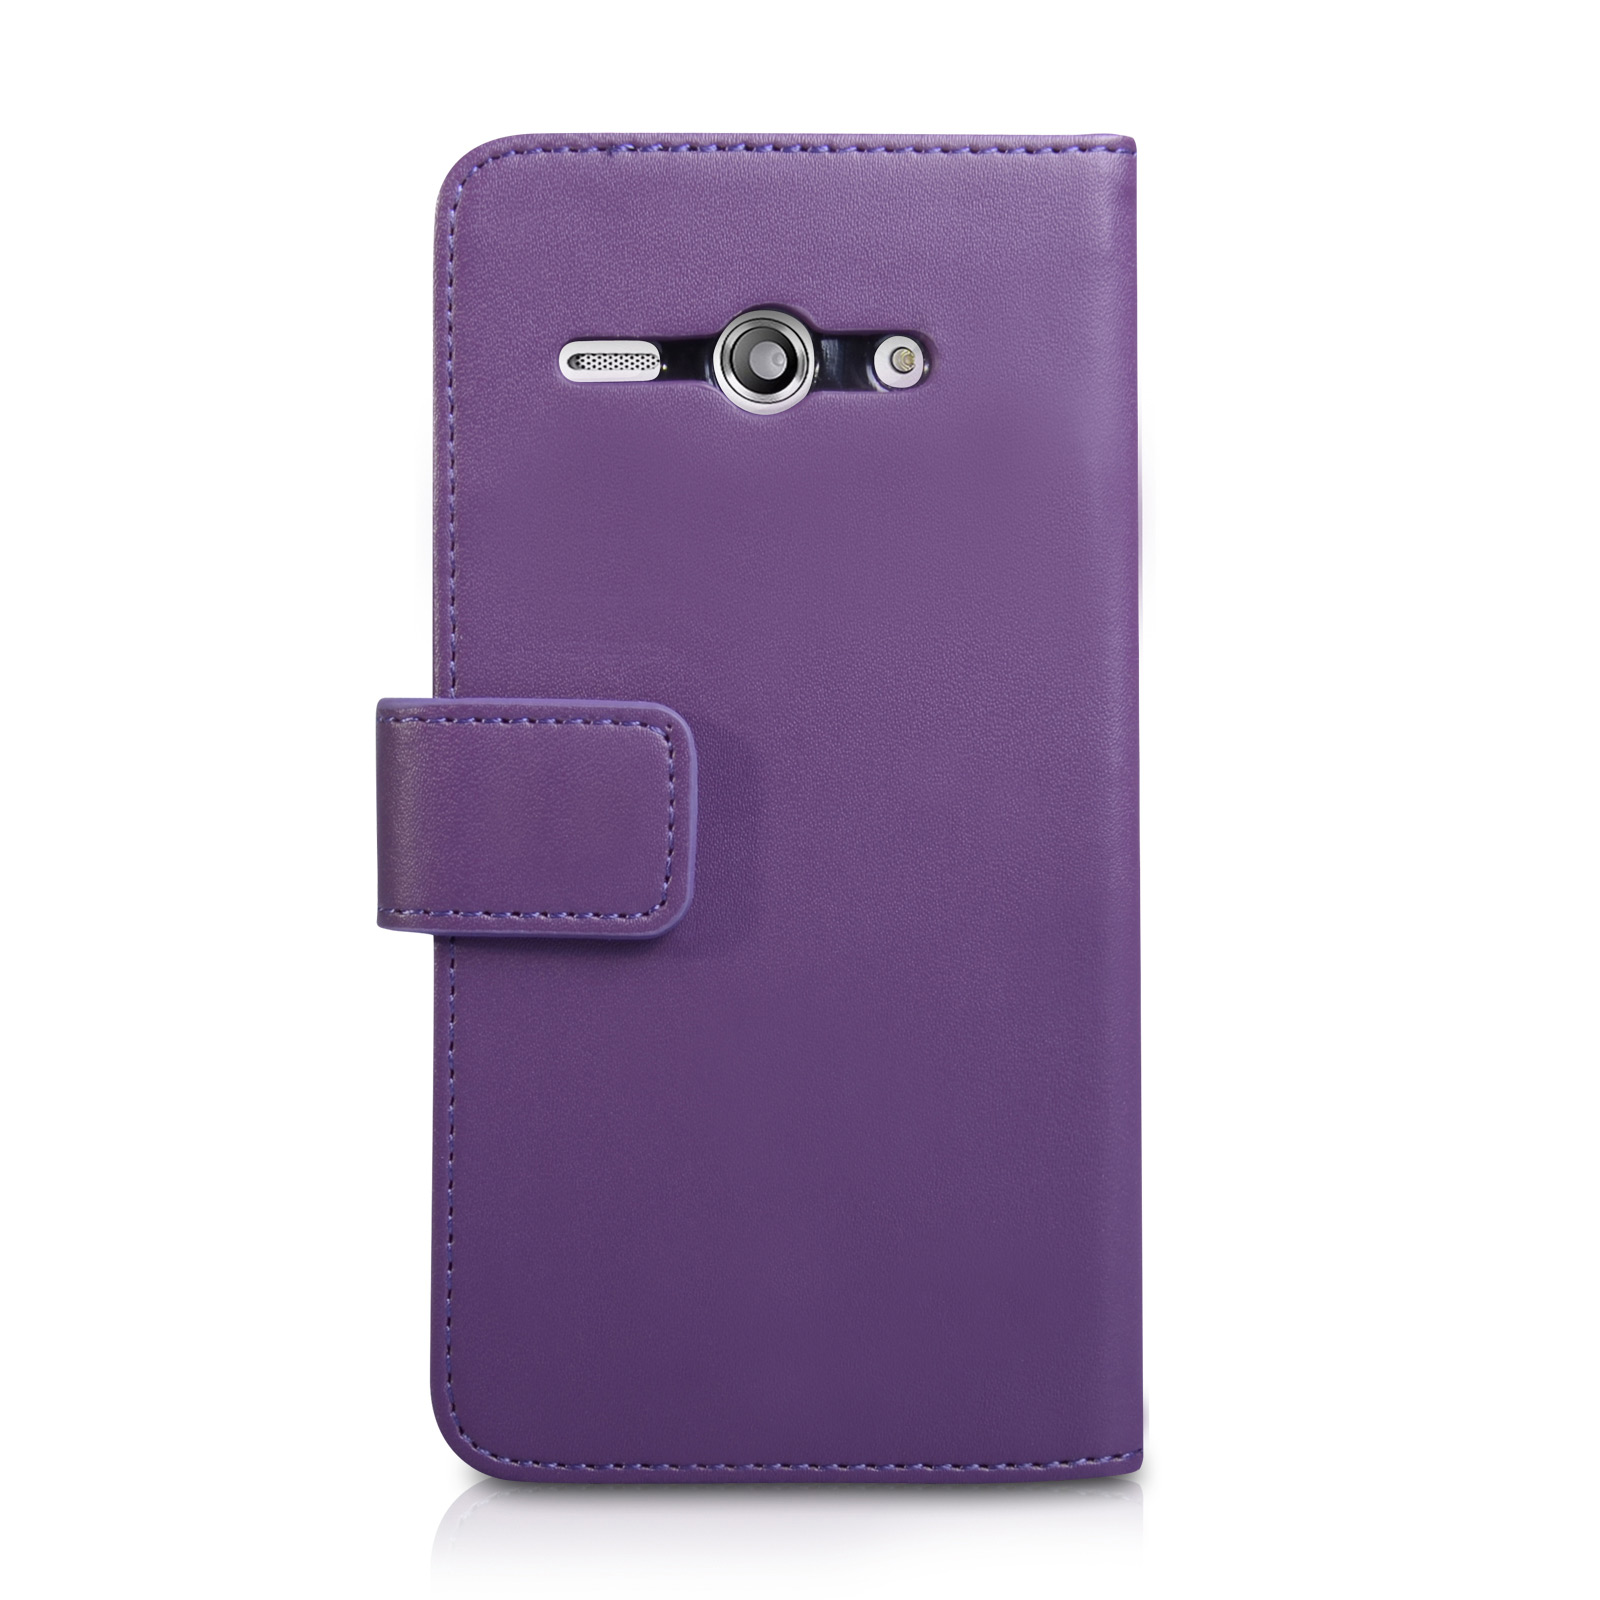 YouSave Huawei Ascend Y530 Leather-Effect Wallet Case - Purple